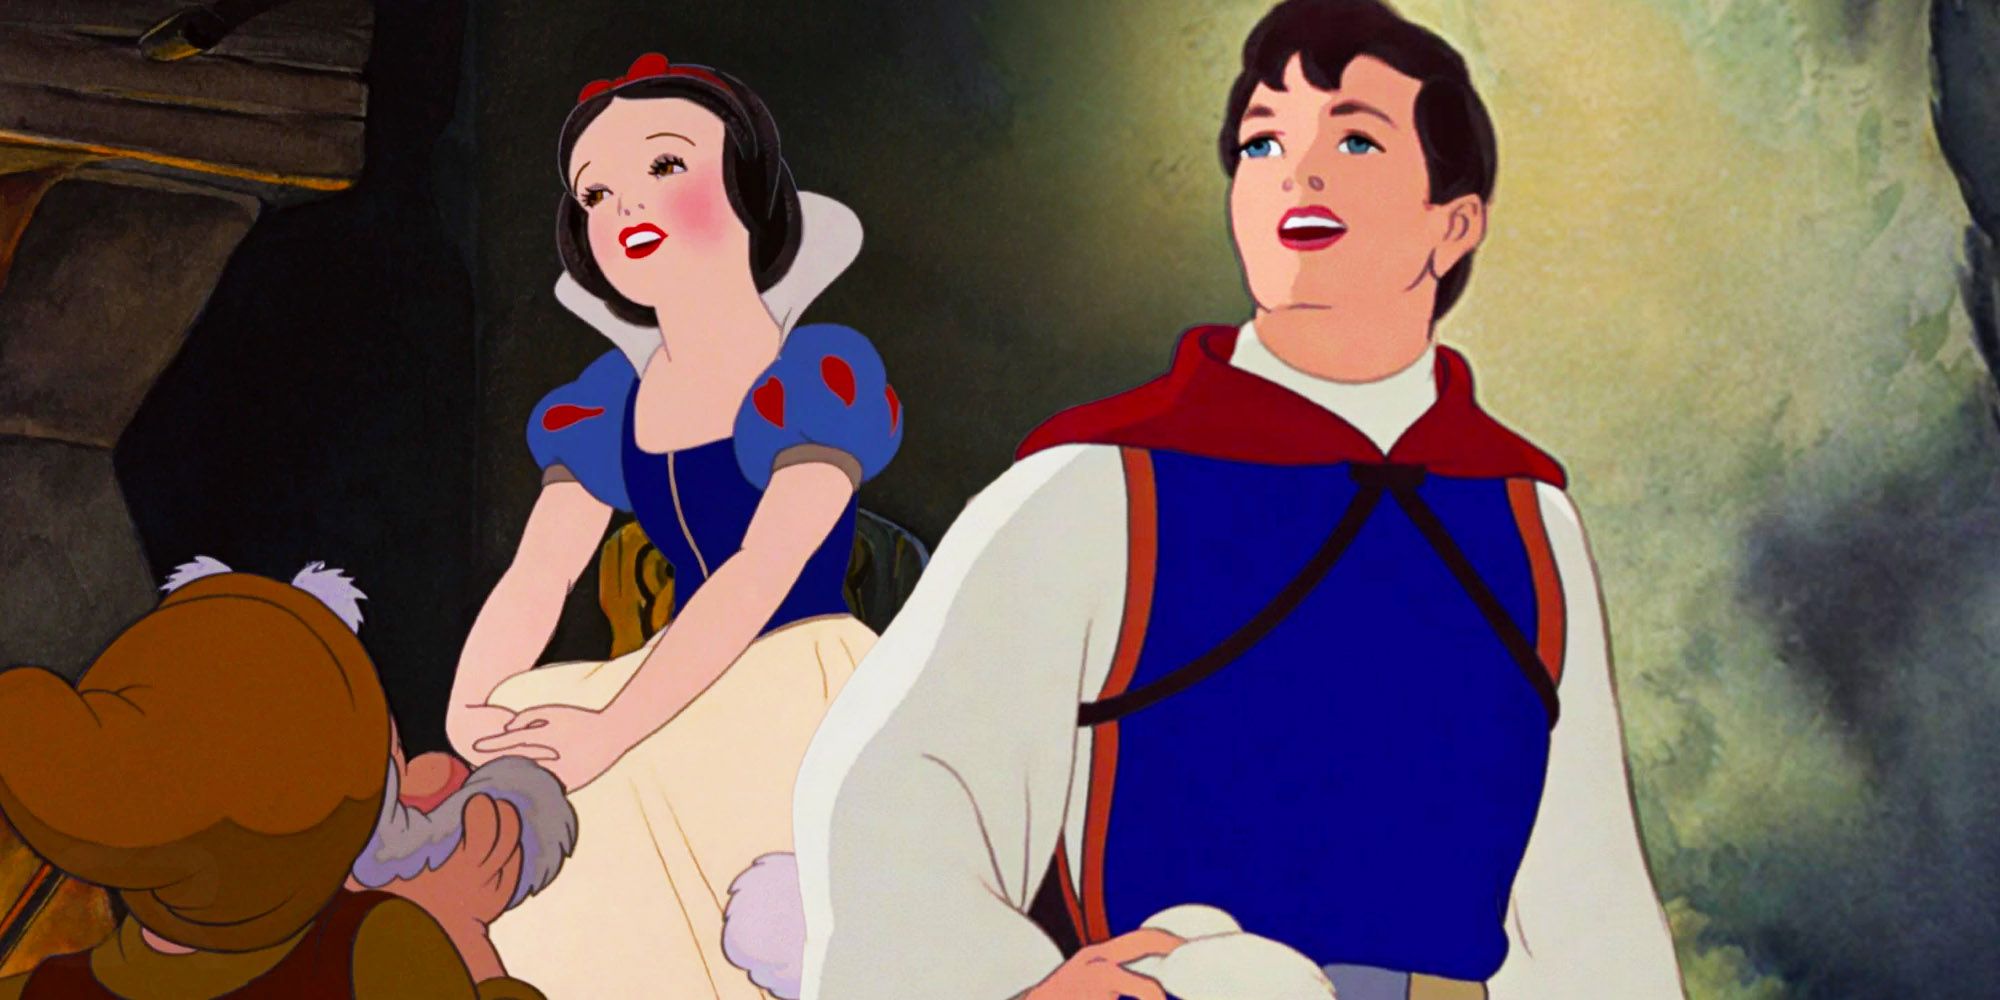 Snow white and the seven dwarfs deleted scene prince charming